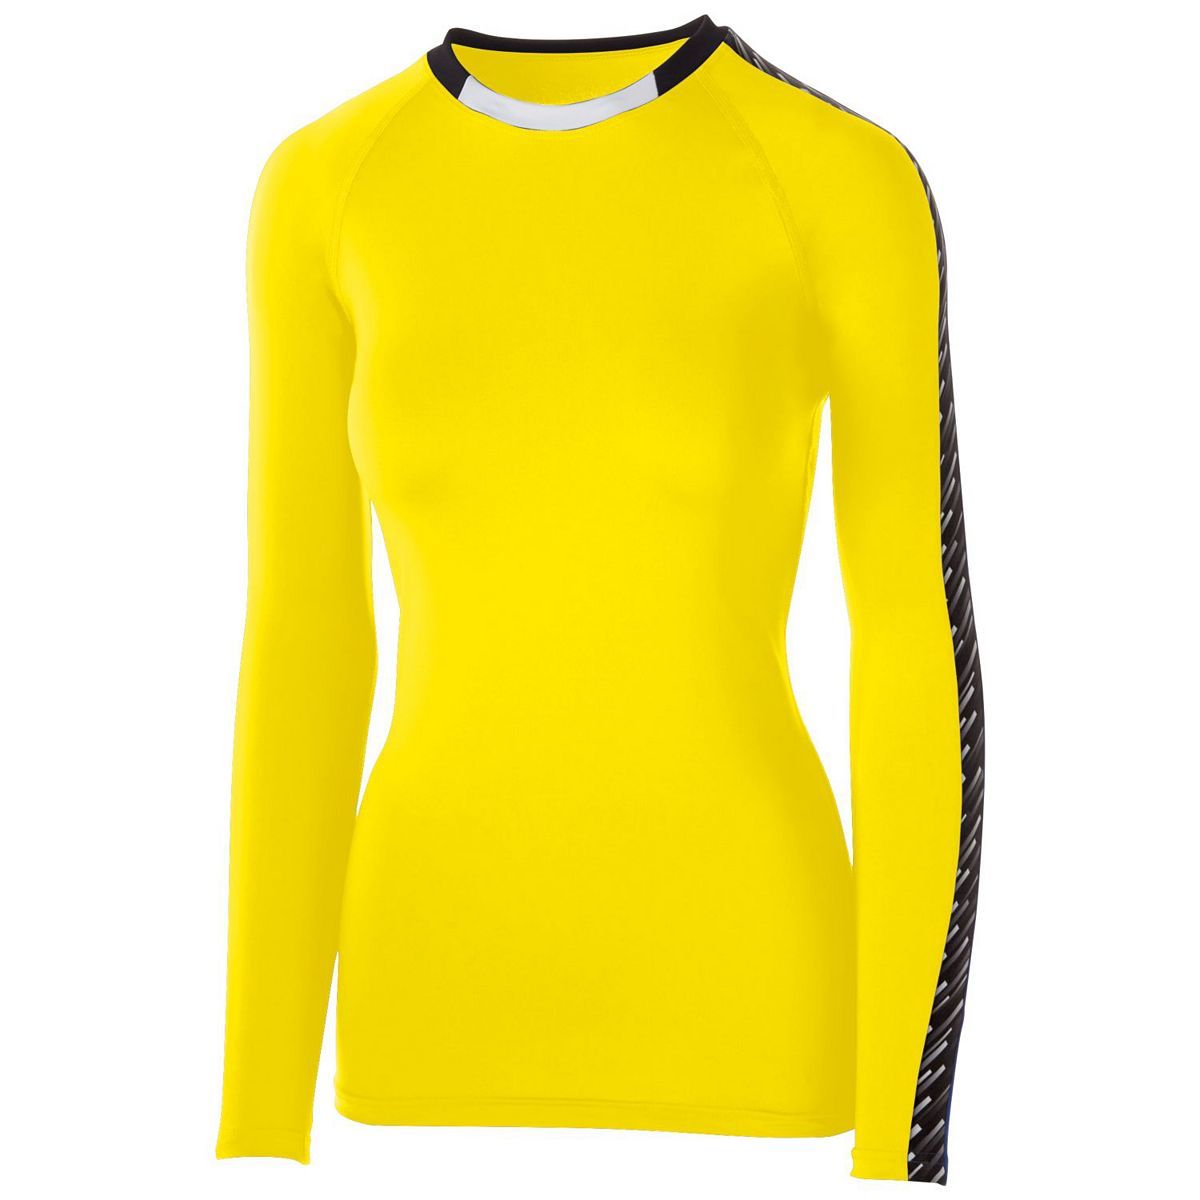 High 5 Ladies Spectrum Long Sleeve Jersey in Power Yellow/Black/White  -Part of the Ladies, Ladies-Jersey, High5-Products, Volleyball, Shirts product lines at KanaleyCreations.com